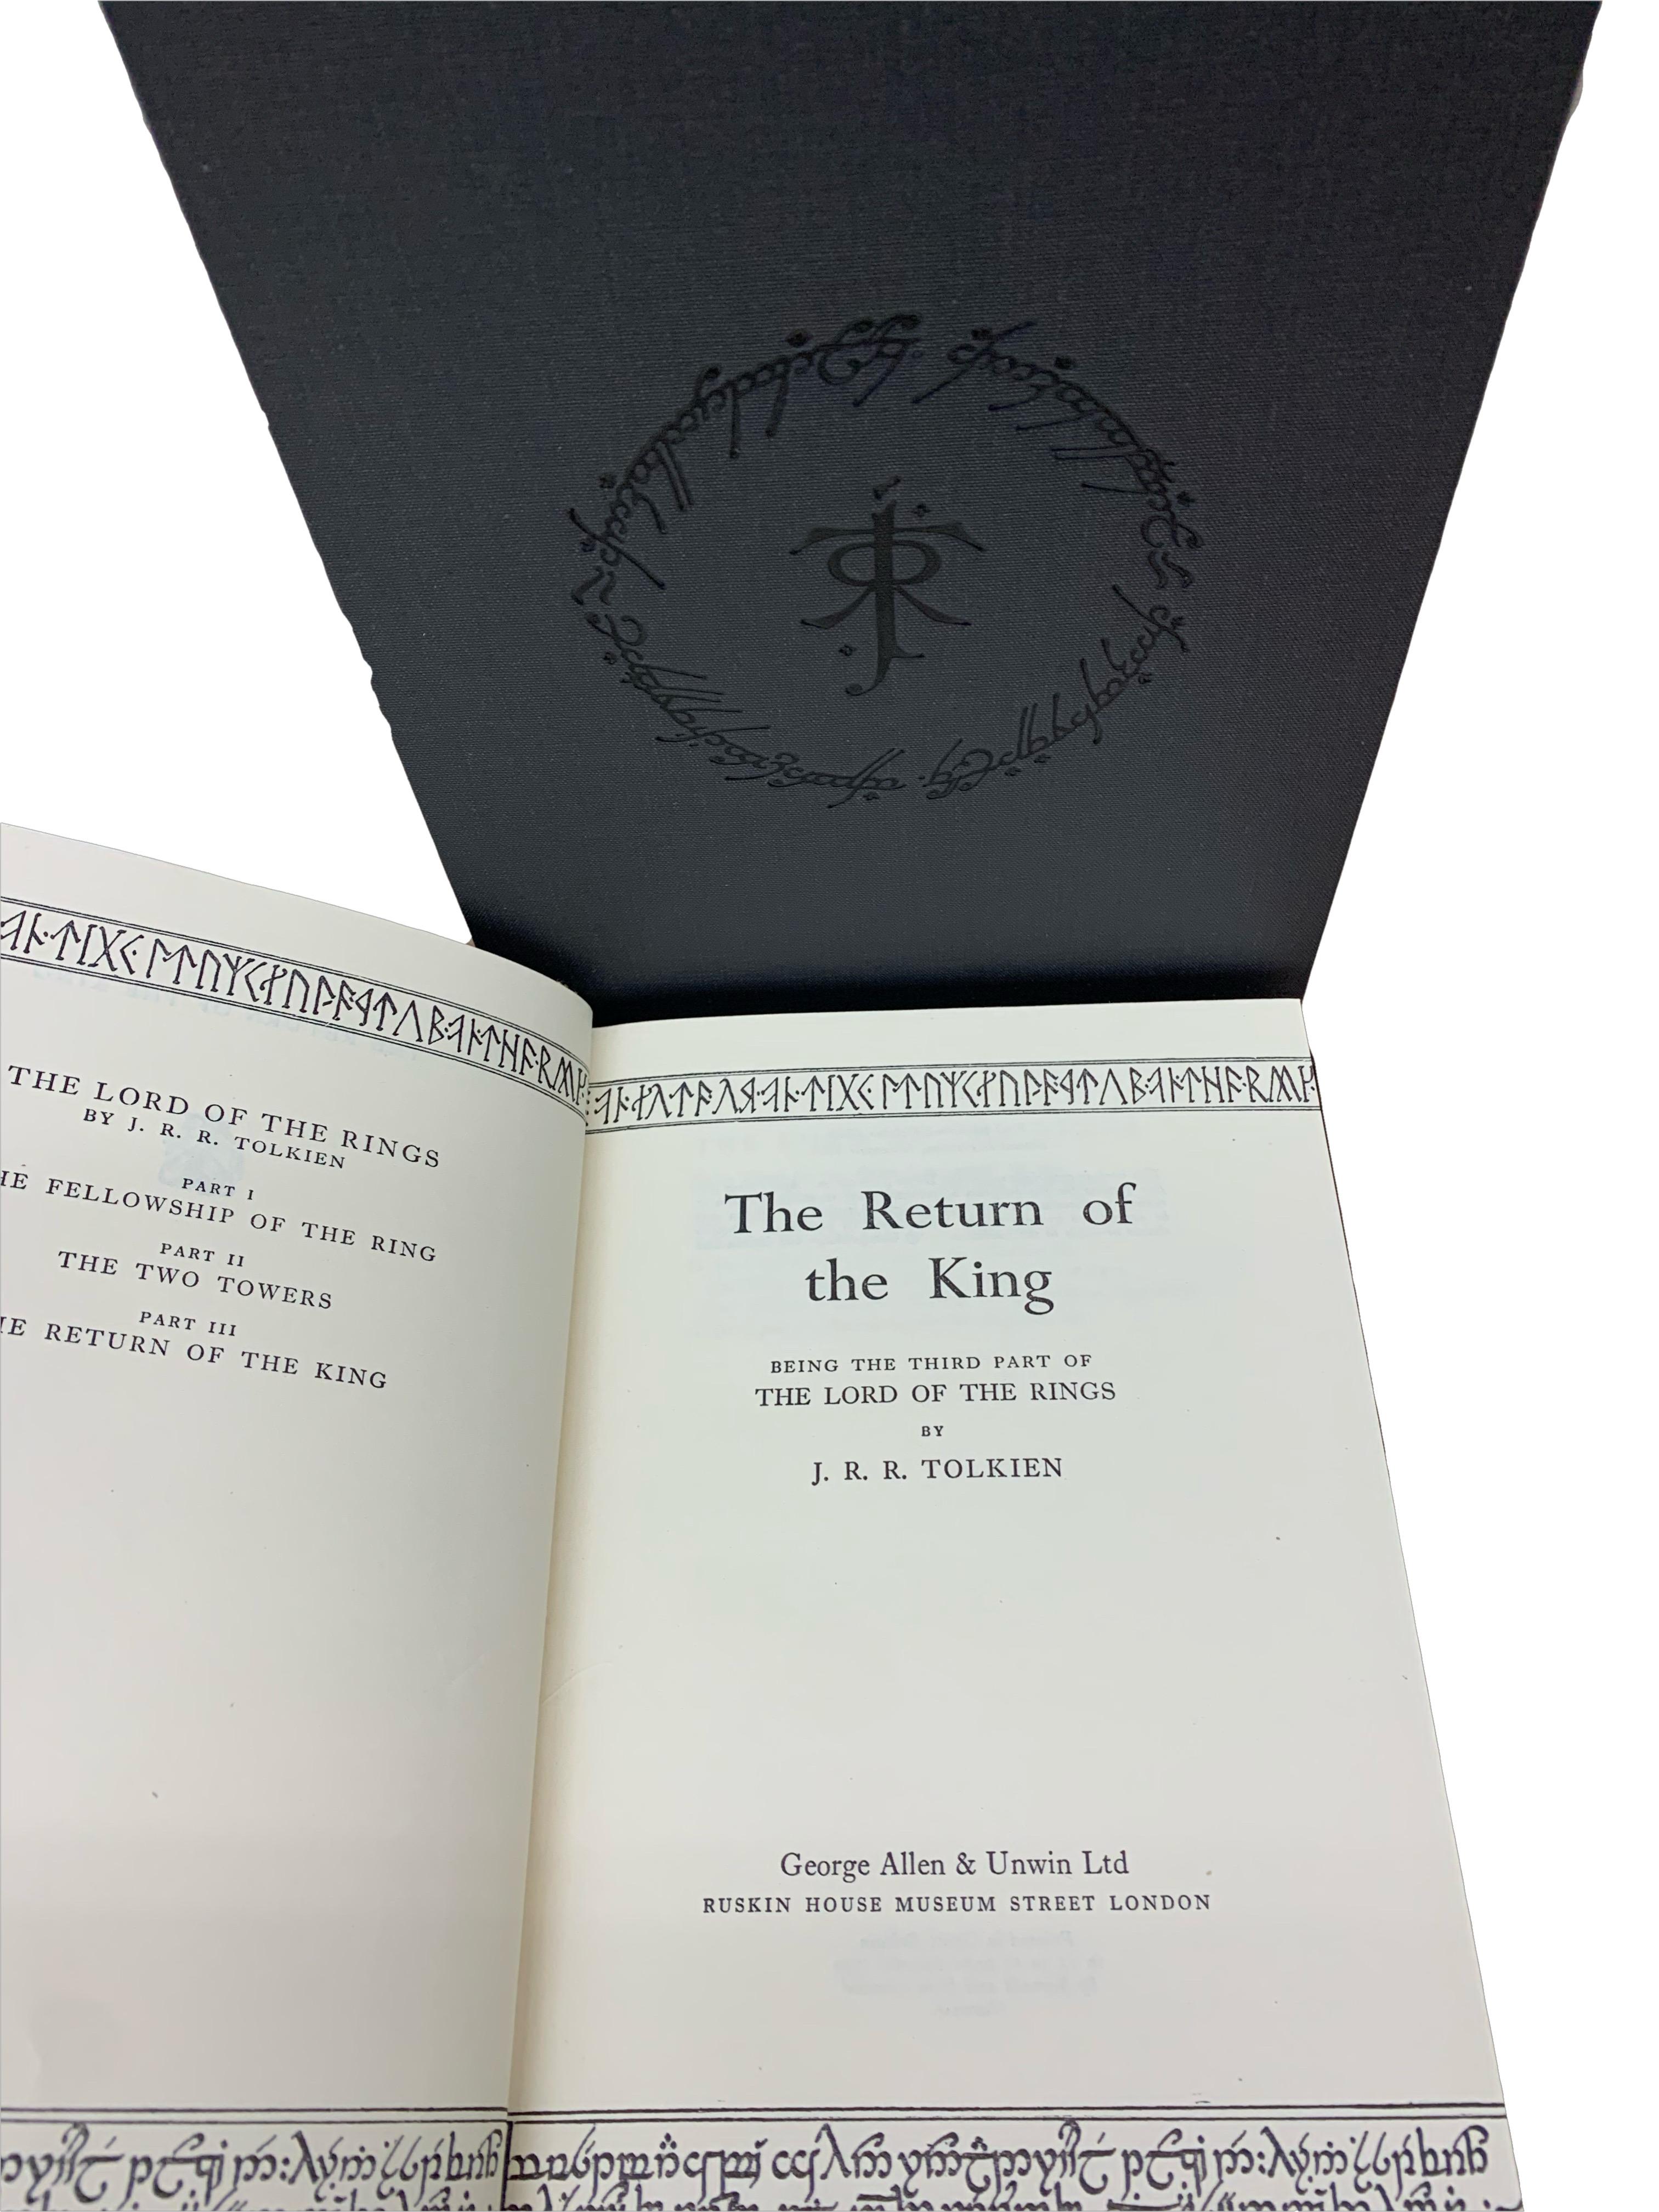 The Lord of the Rings Trilogy by J.R.R. Tolkien, In Three Vol. Complete, 1955-56 6